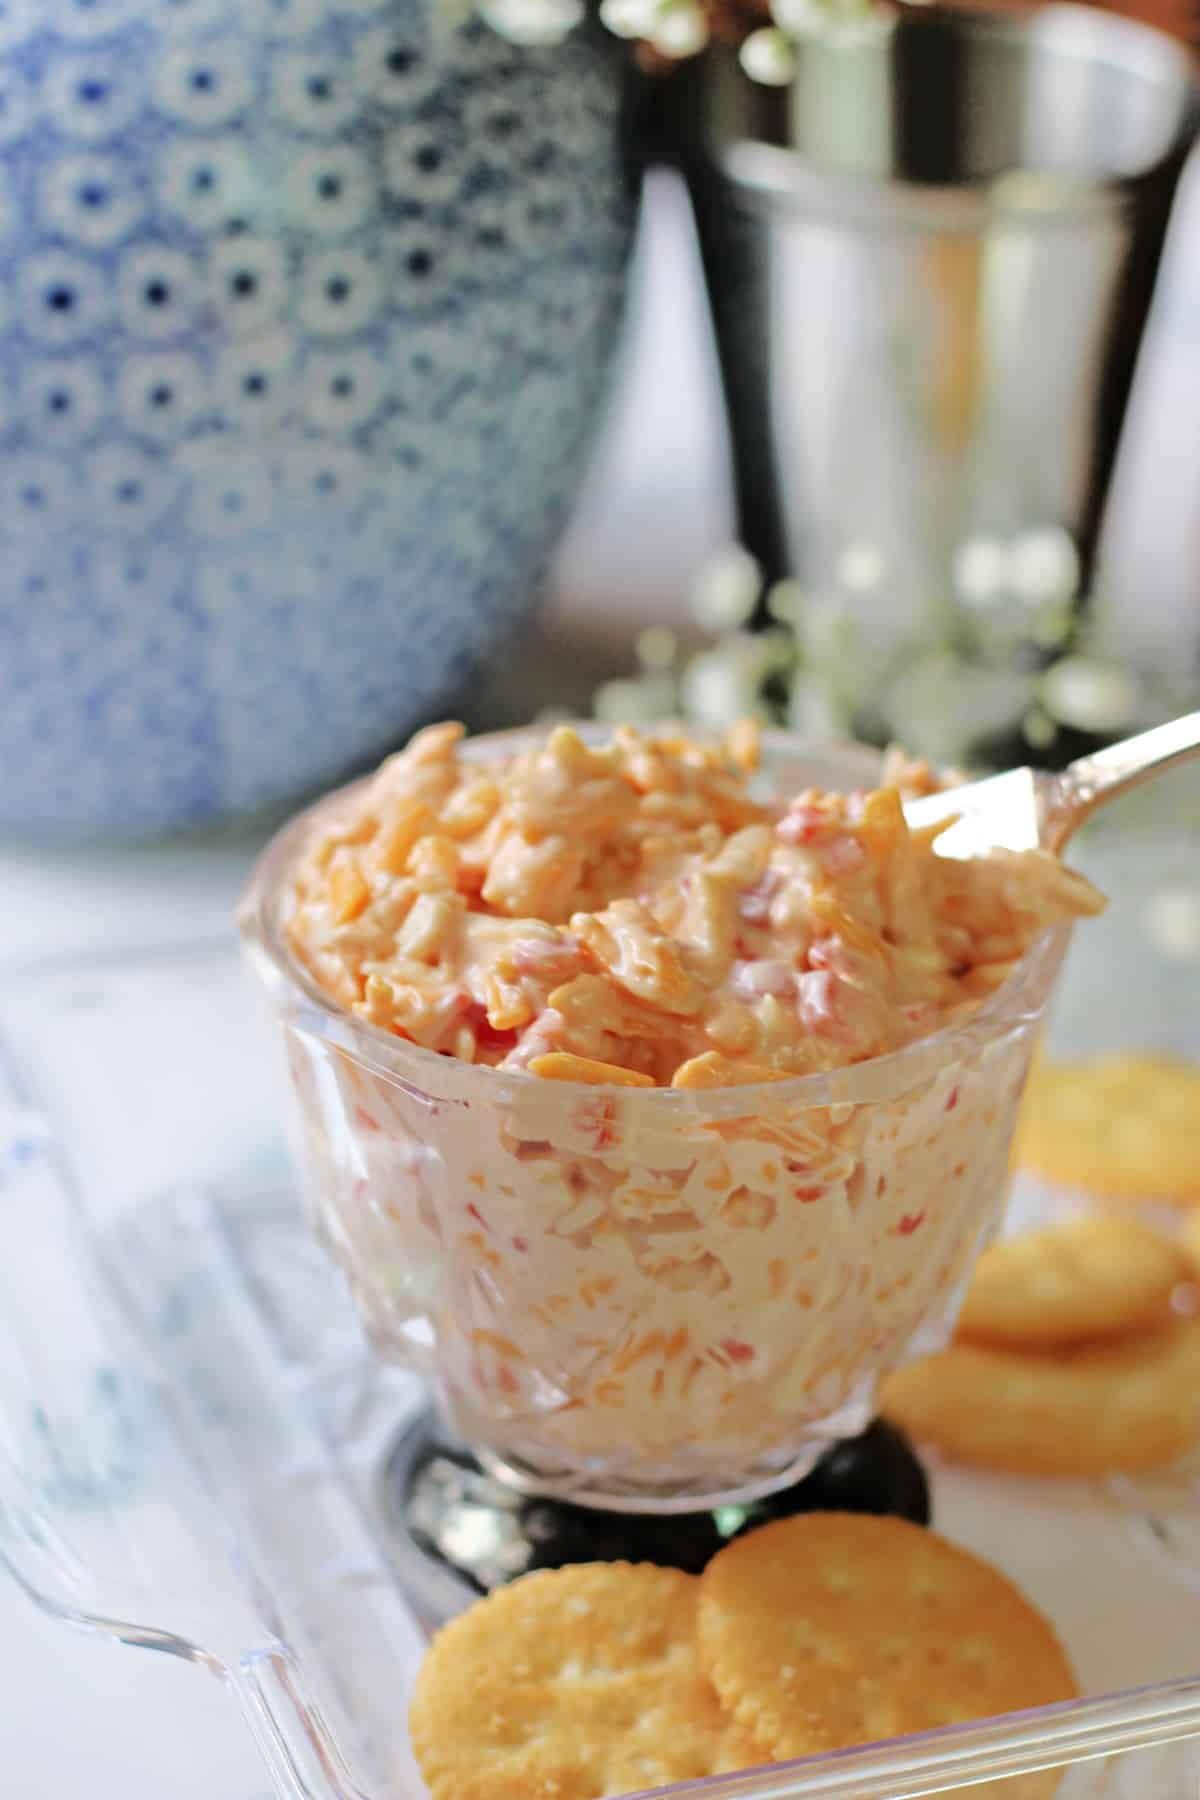 Pimento Cheese in a glass serving dish with crackers.